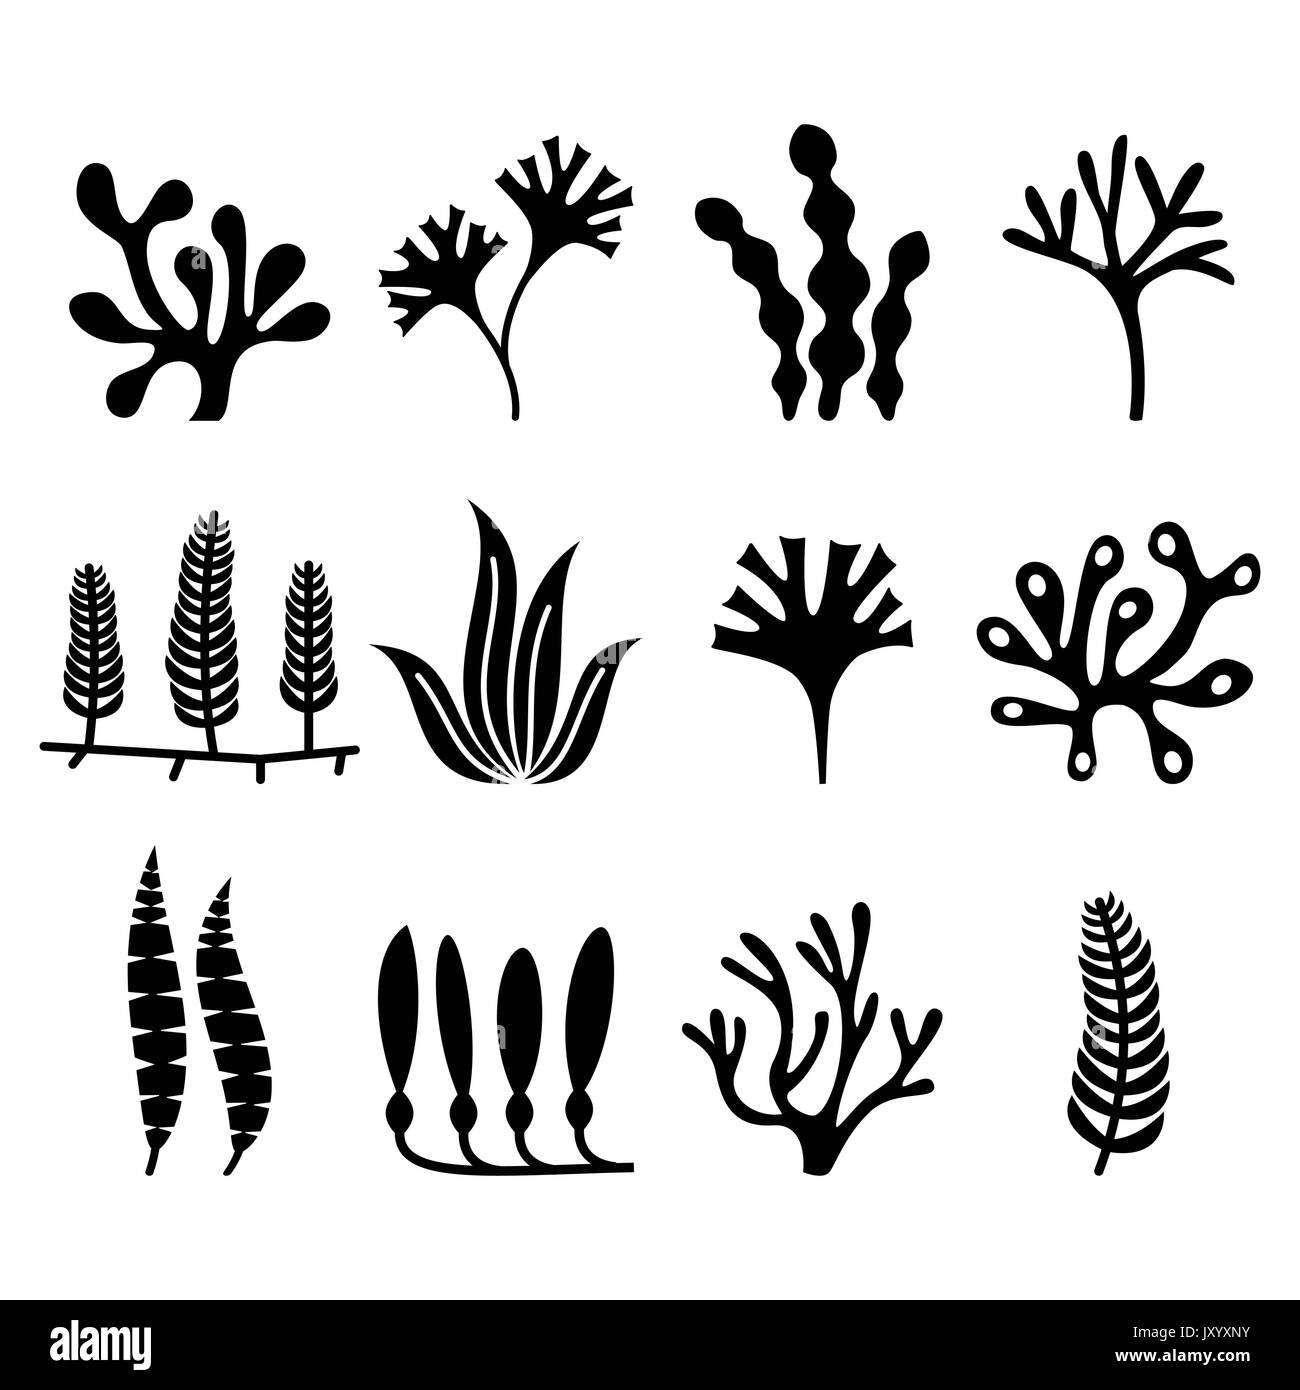 Seaweed icons set - nature, food trends concept Stock Vector